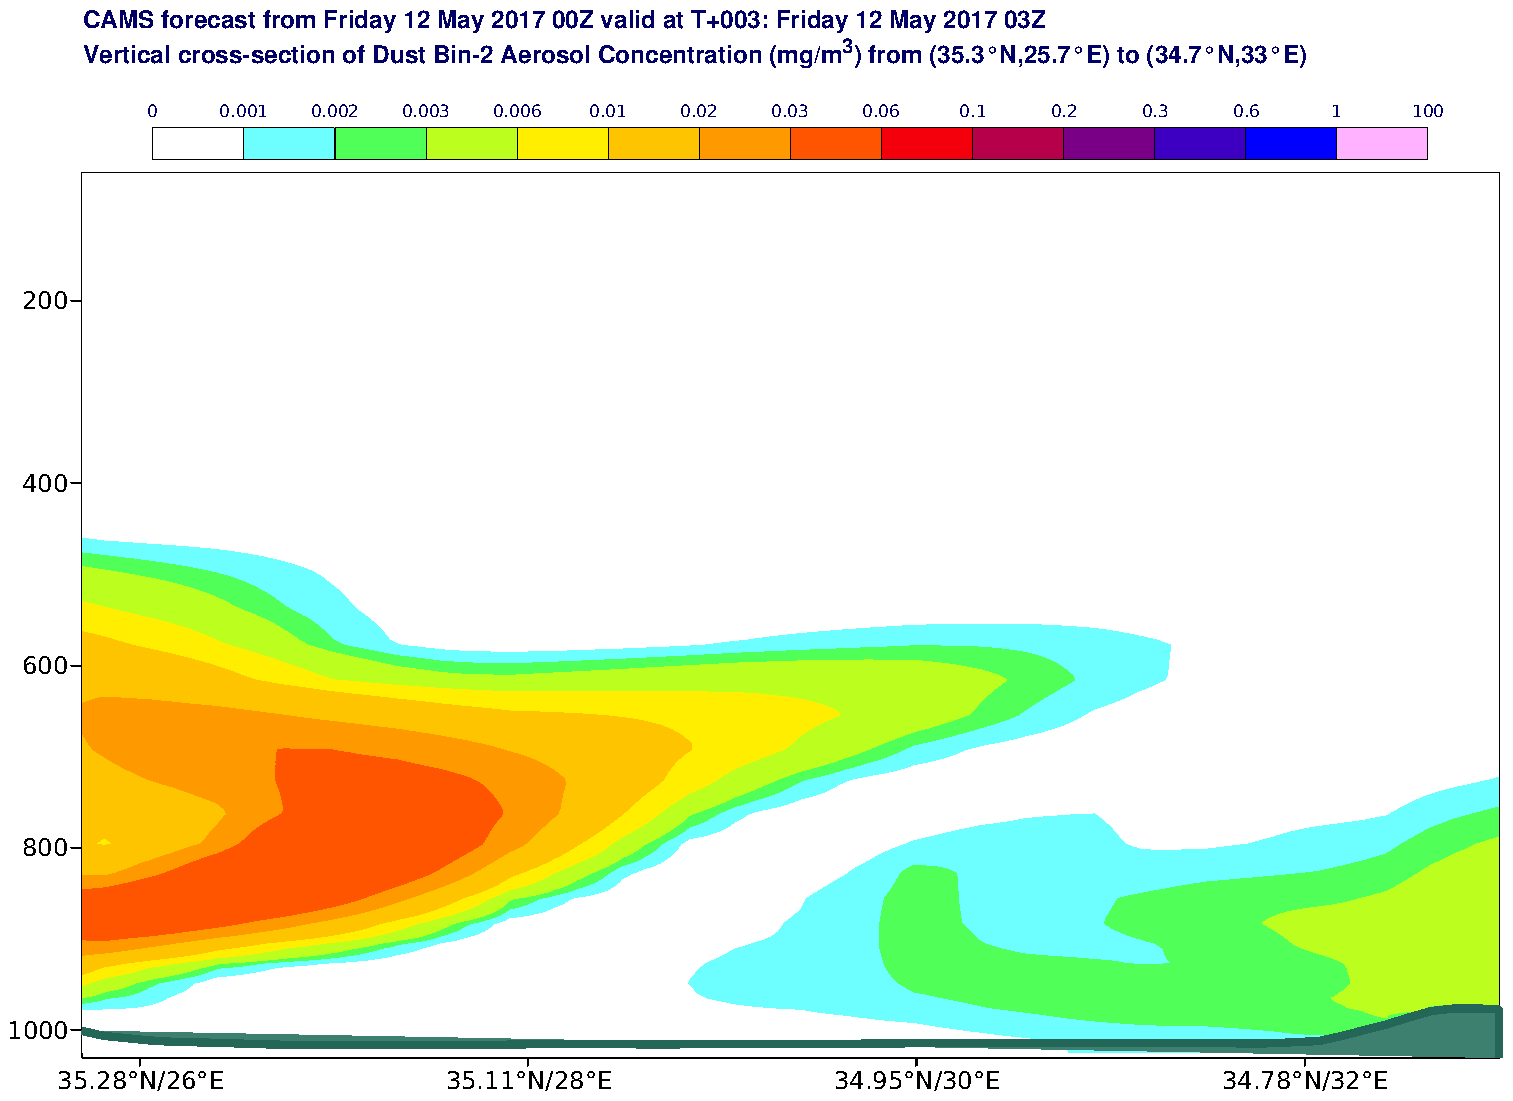 Vertical cross-section of Dust Bin-2 Aerosol Concentration (mg/m3) valid at T3 - 2017-05-12 03:00